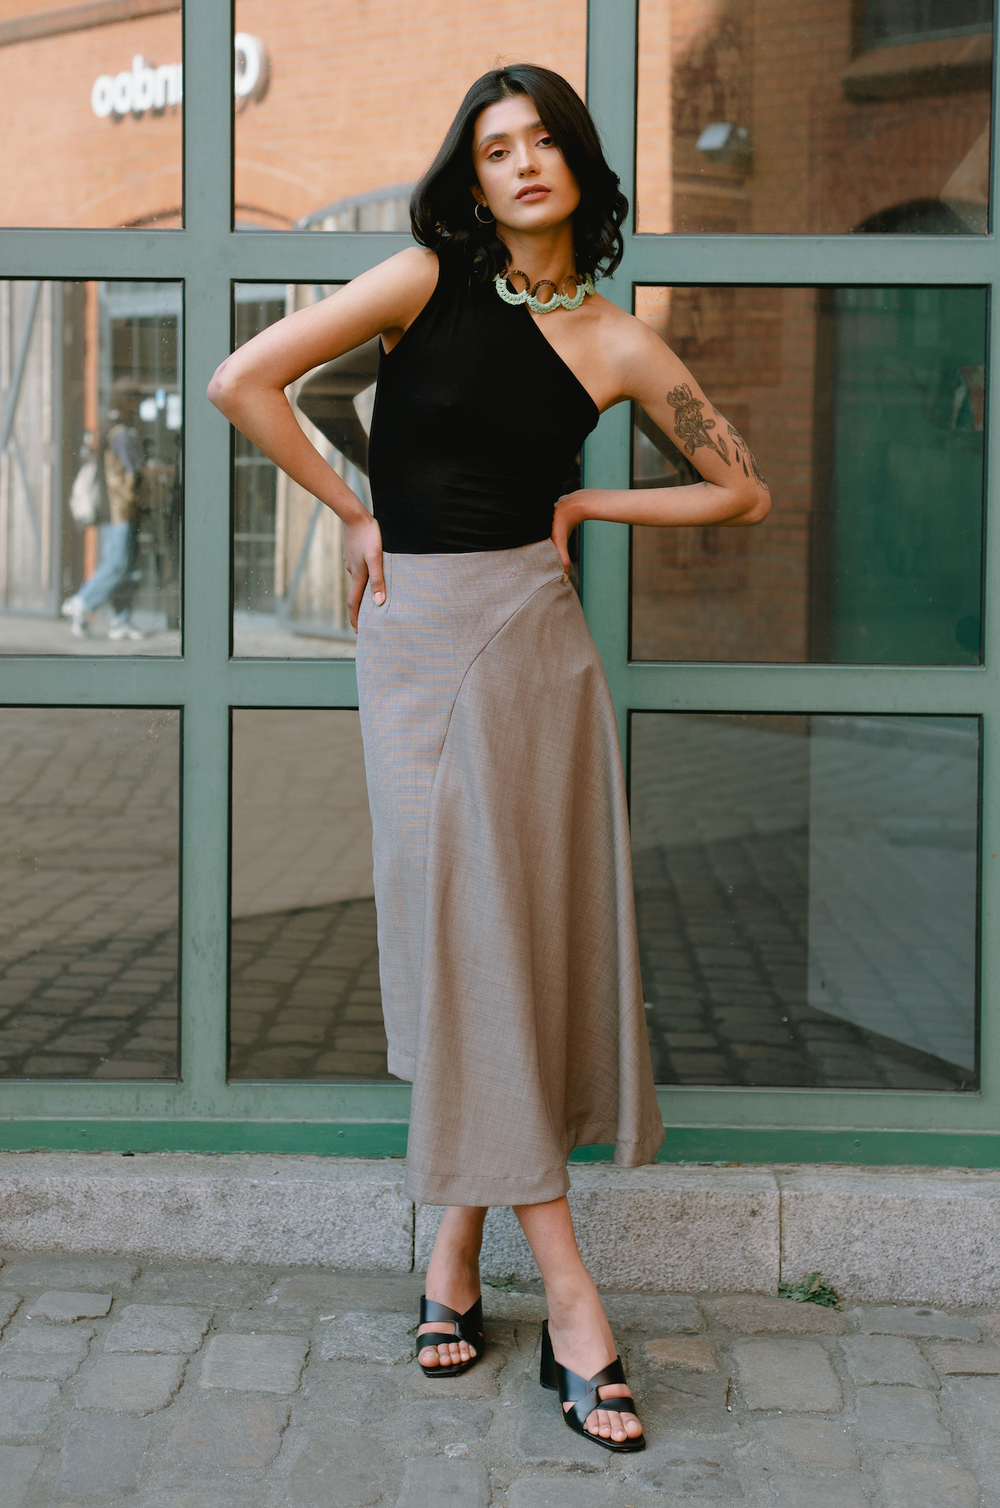 Woman wearing the Willow Skirt sewing pattern from JULIANA MARTEJEVS on The Fold Line. A skirt pattern made in wool or cotton fabrics, featuring an asymmetric silhouette, midi length, waist darts, and invisible zip closure.